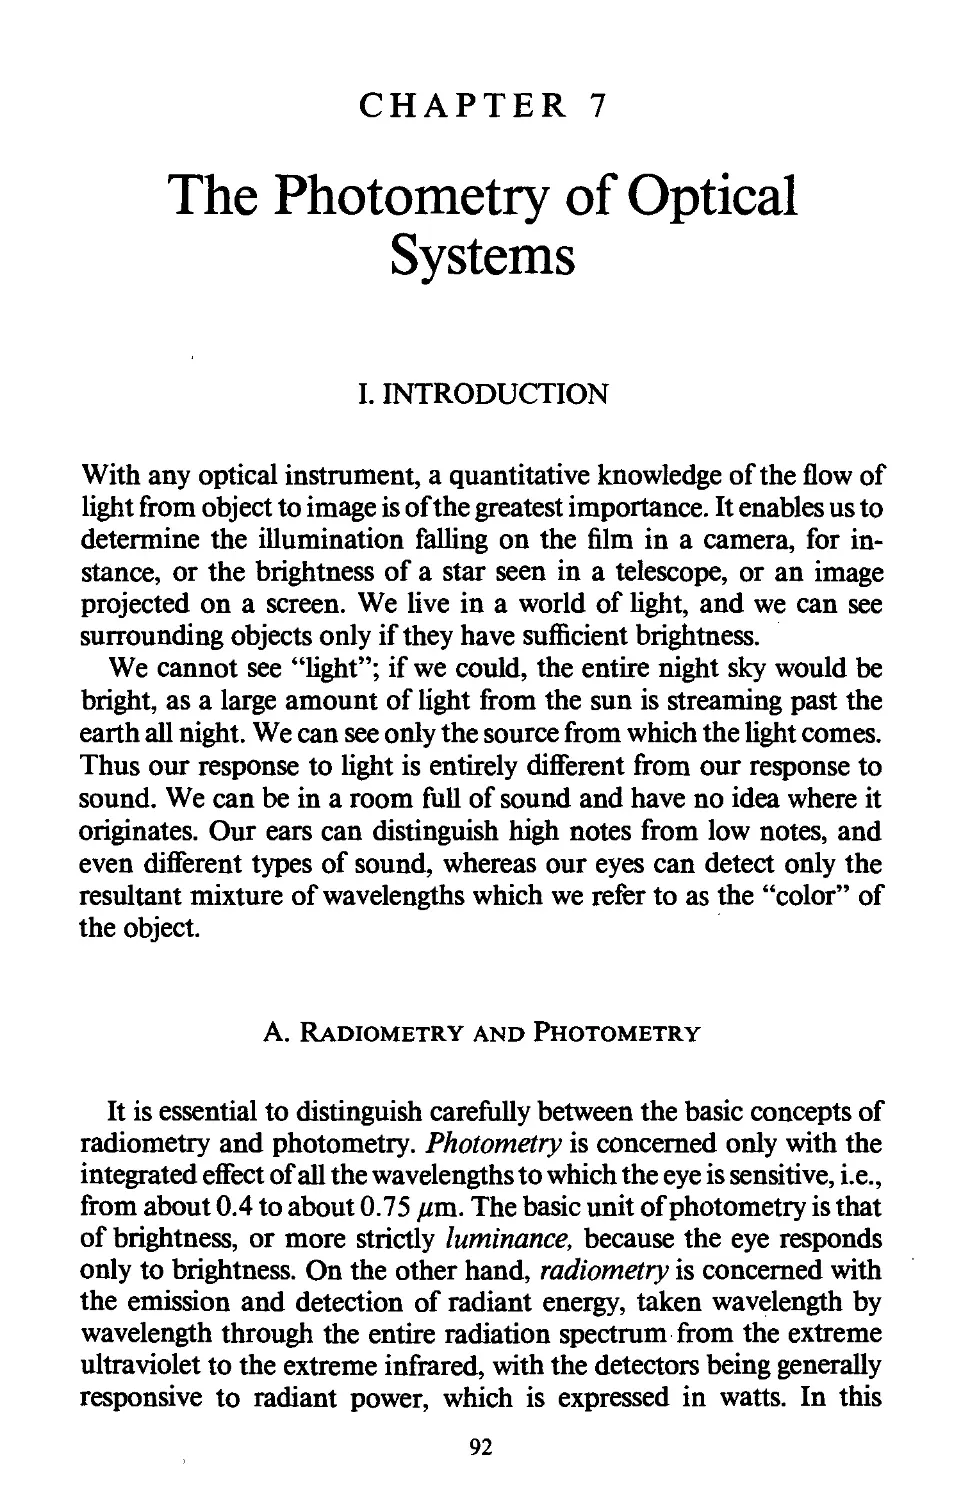 7. THE PHOTOMETRY OF OPTICAL SYSTEMS